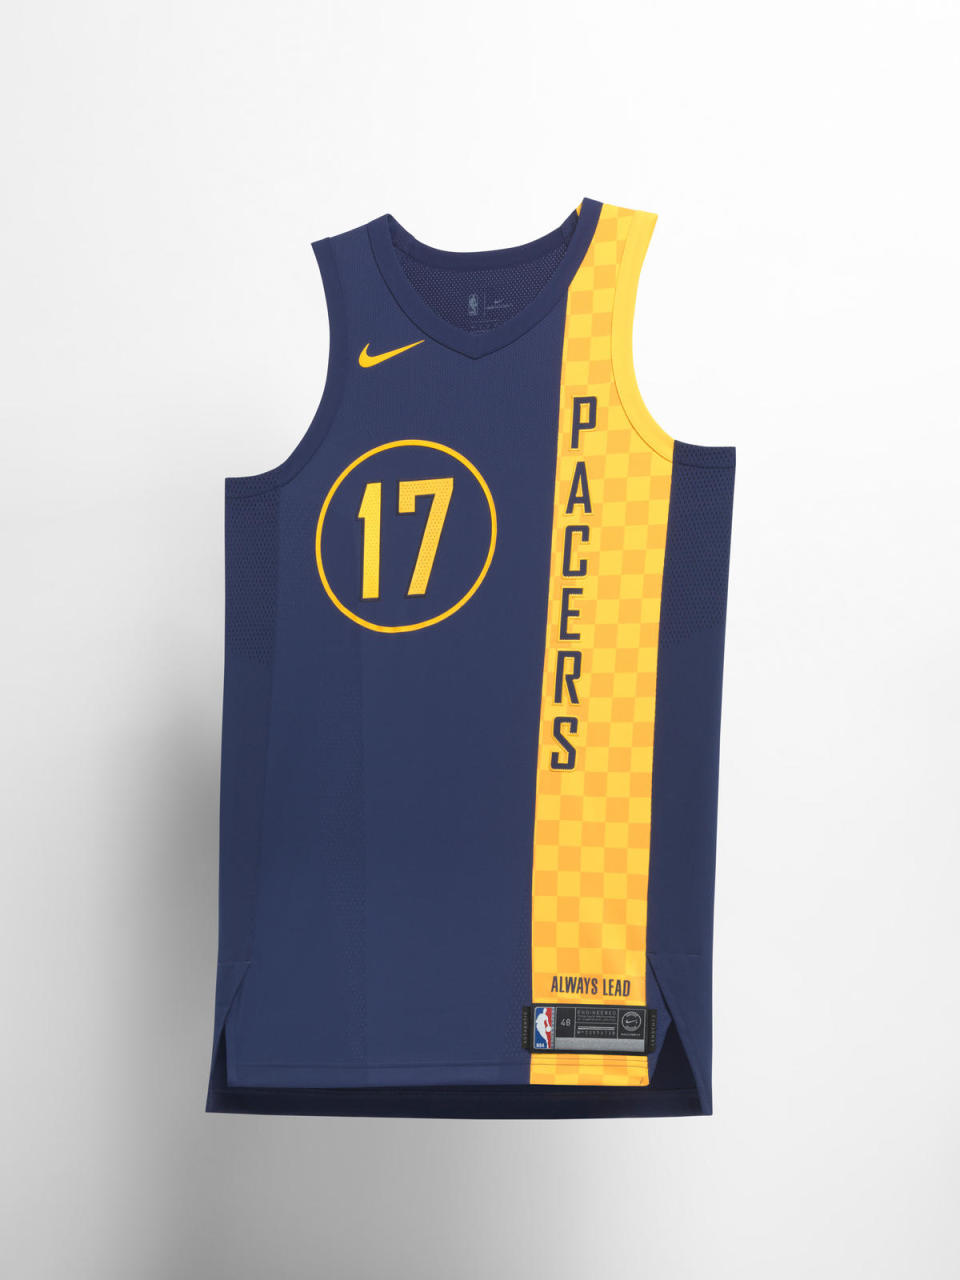 Indiana Pacers City uniform. (Nike)